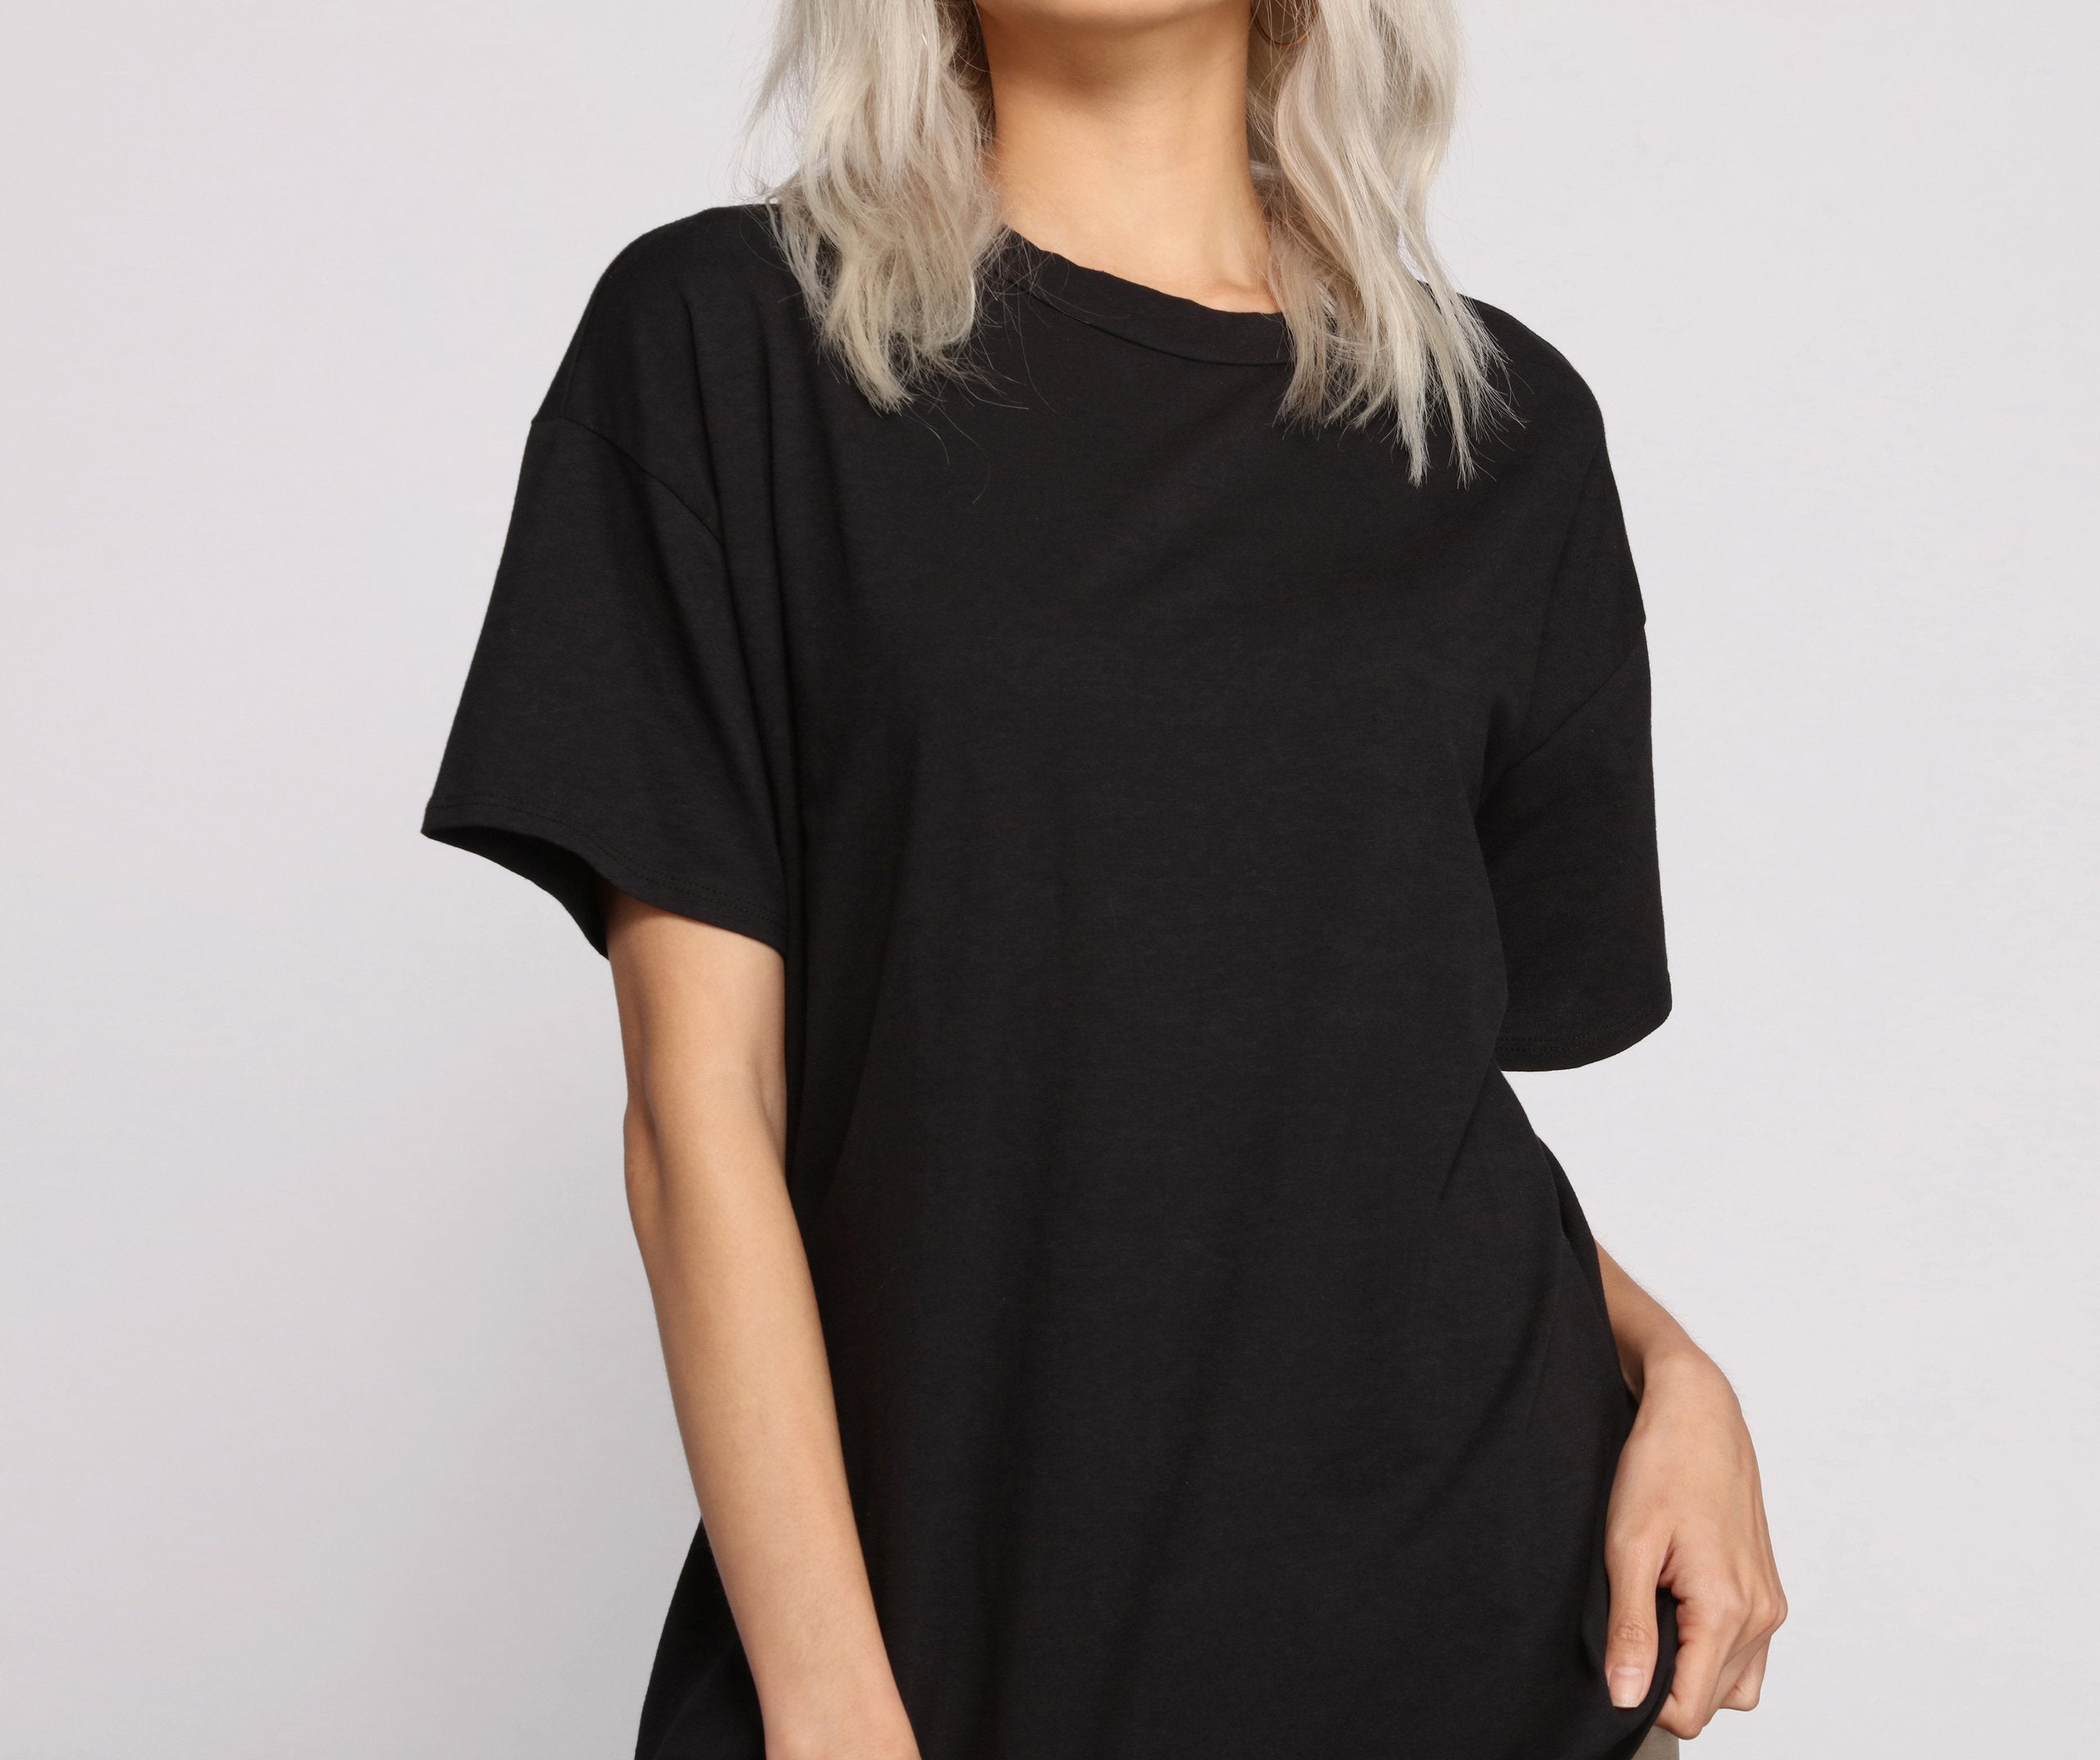 Essential Casual Oversize Basic Tee Shirt - Lady Occasions